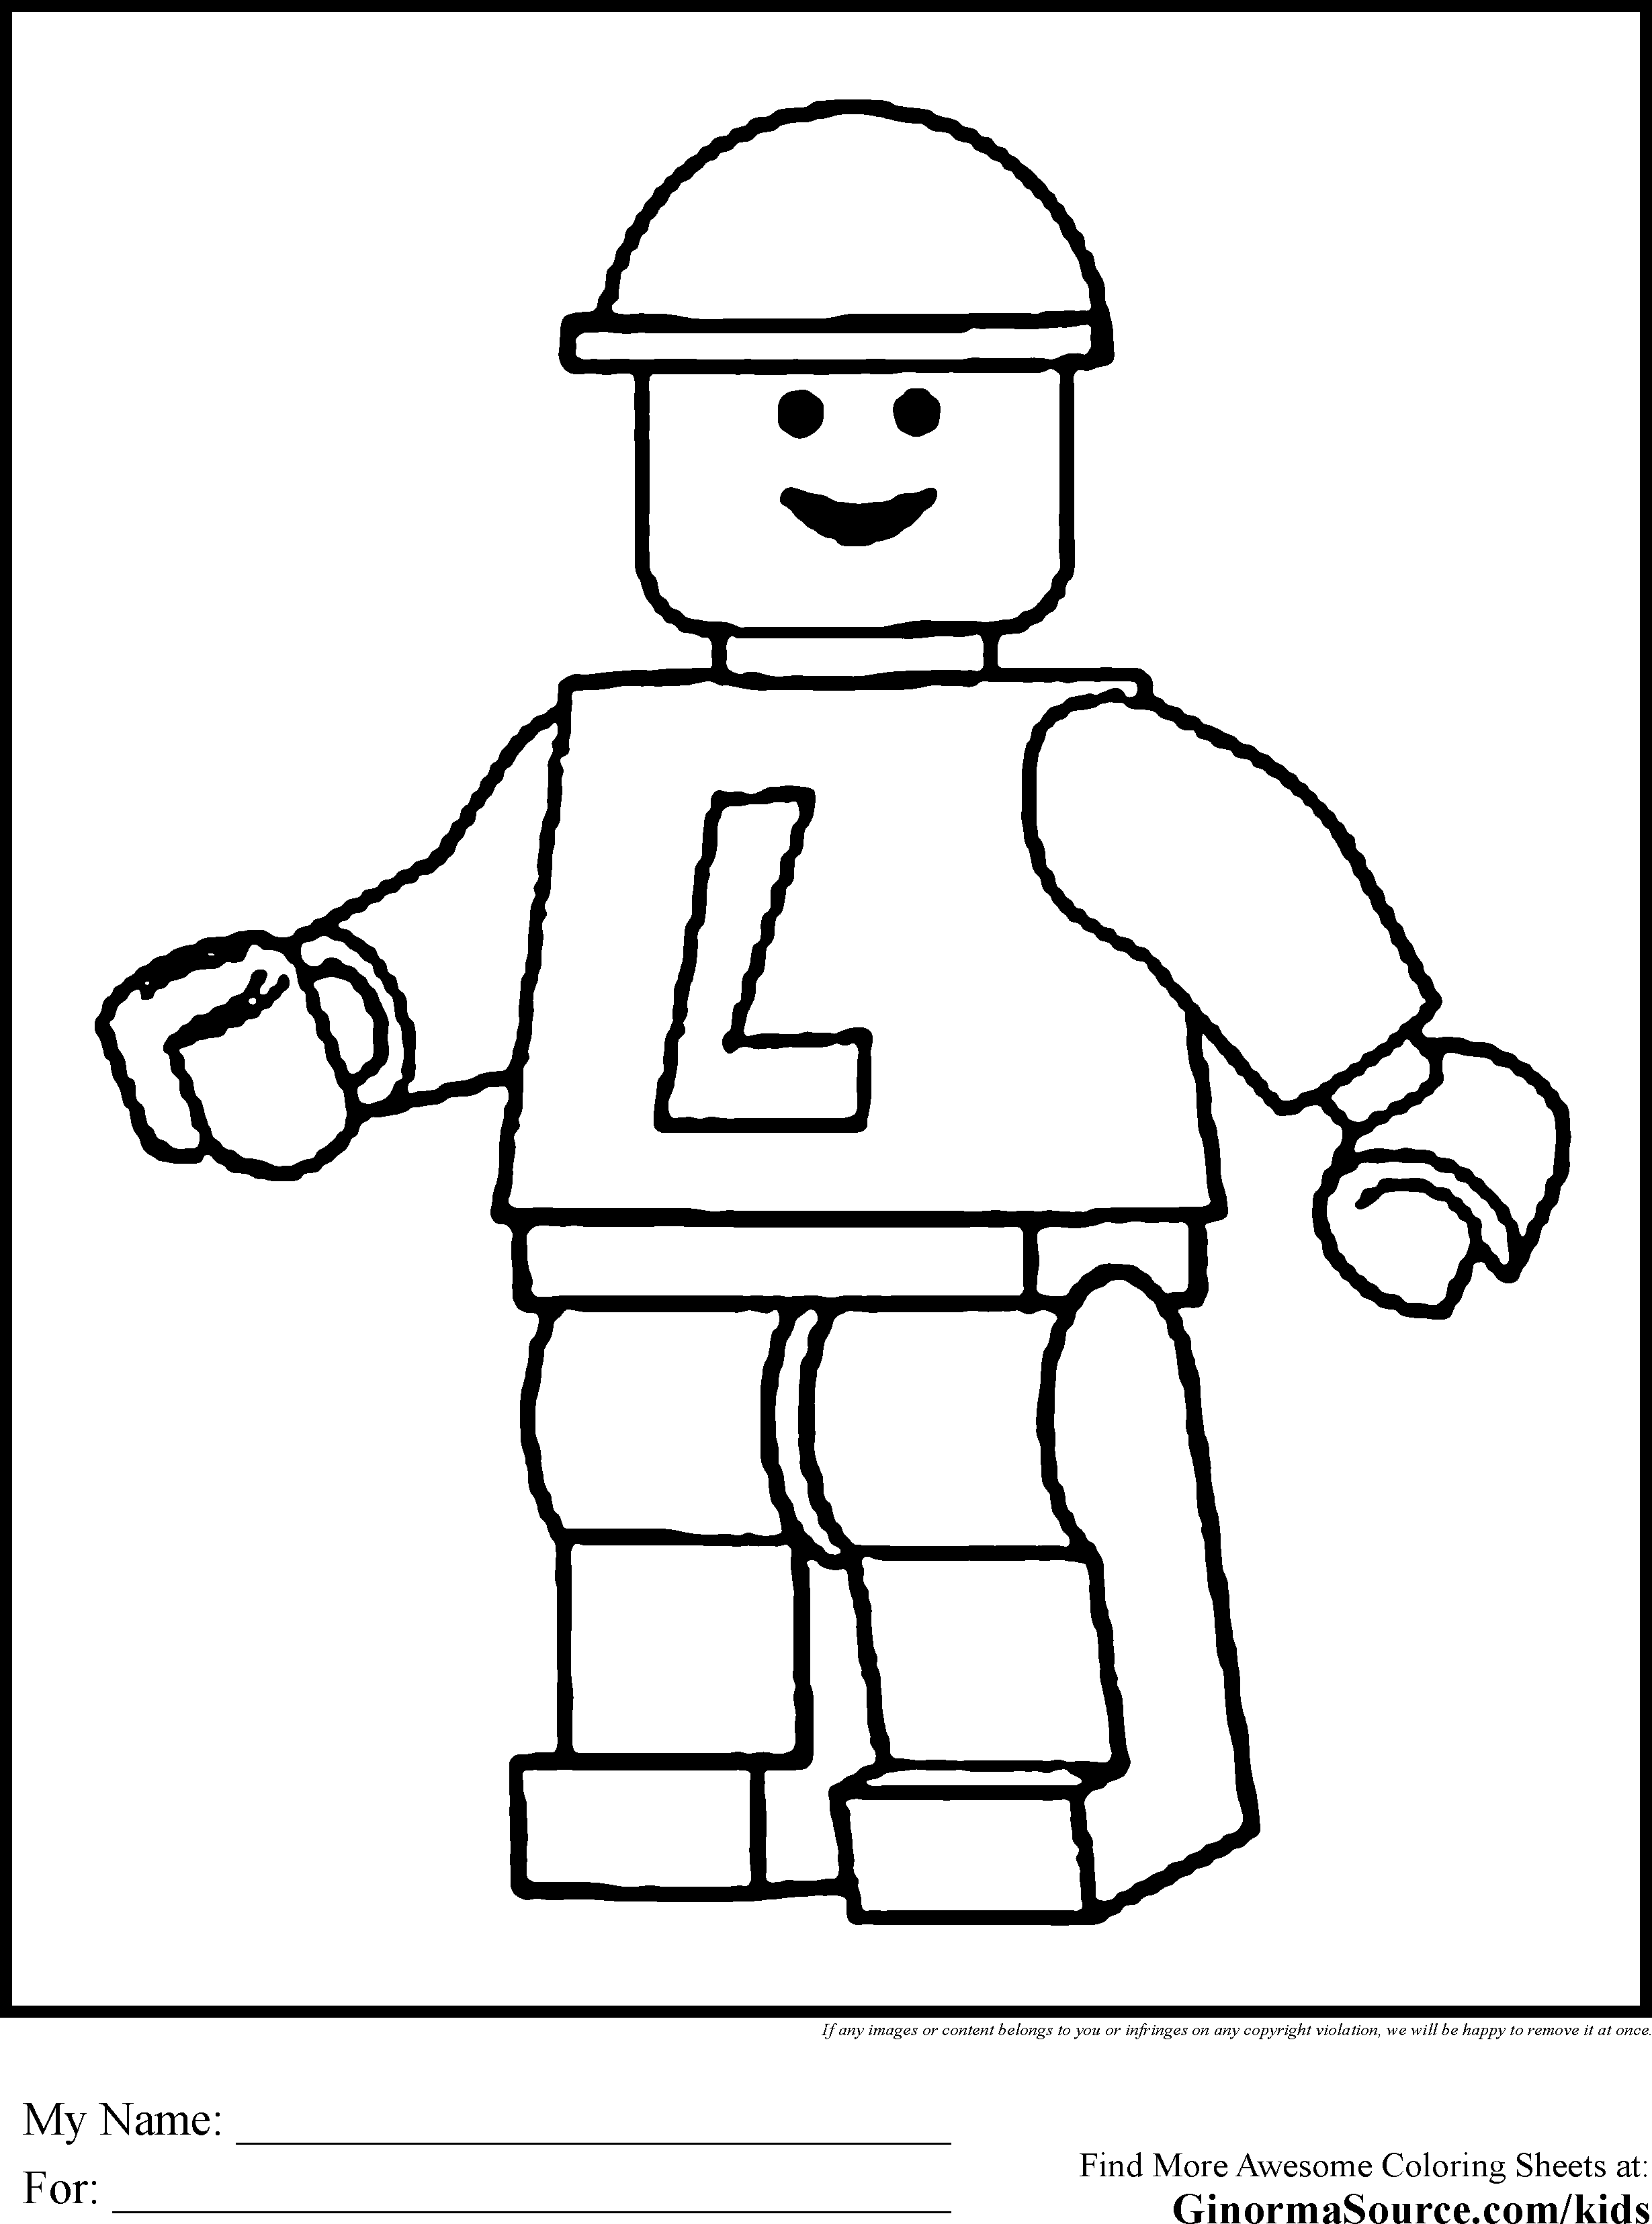 Free Lego Block Coloring Pages, Download Free Clip Art, Free Clip ...